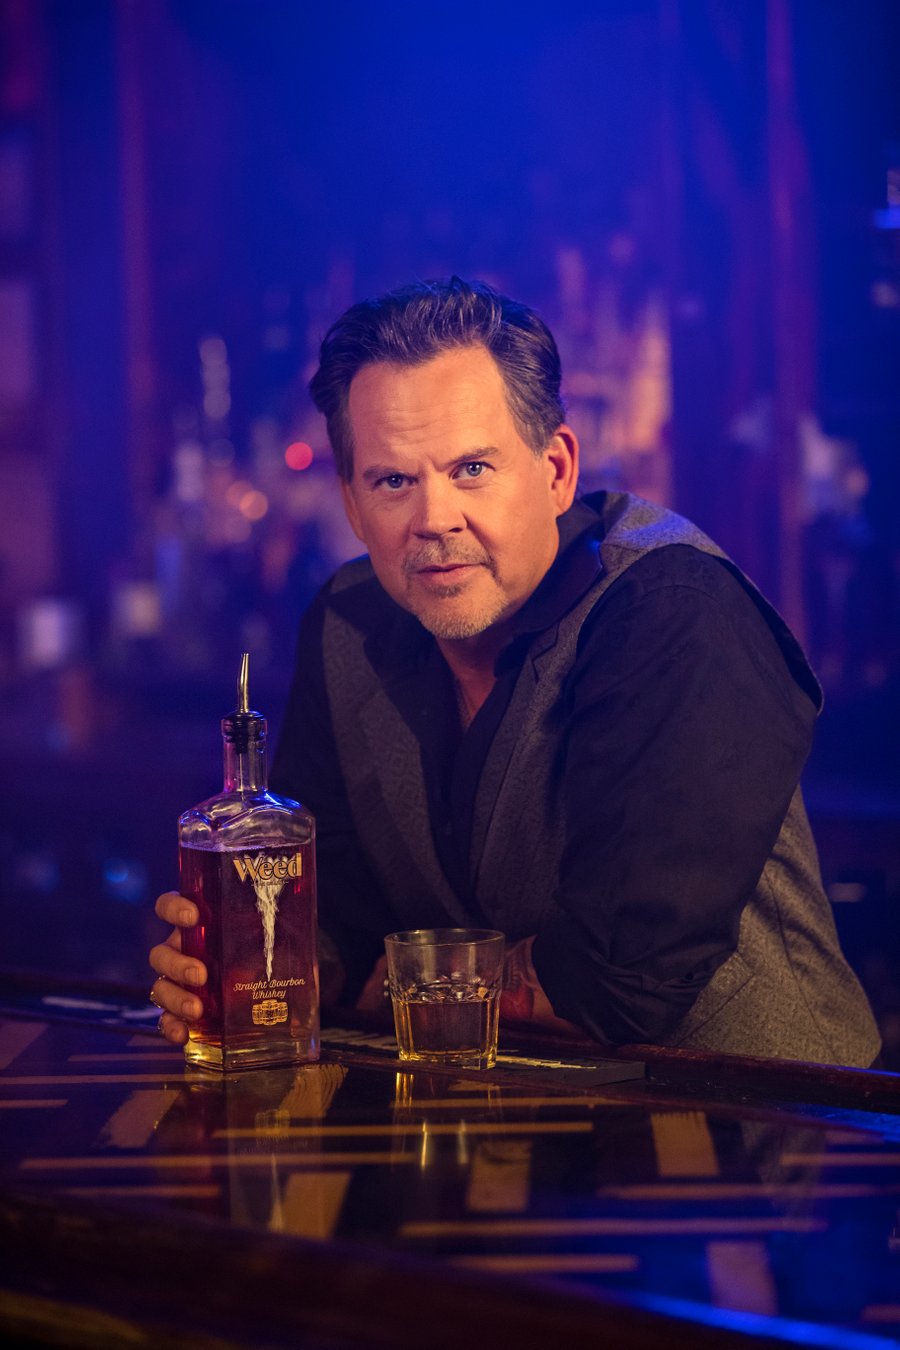 Gary Allan sitting at a bar with Weed Straight Burboun Whiskey!